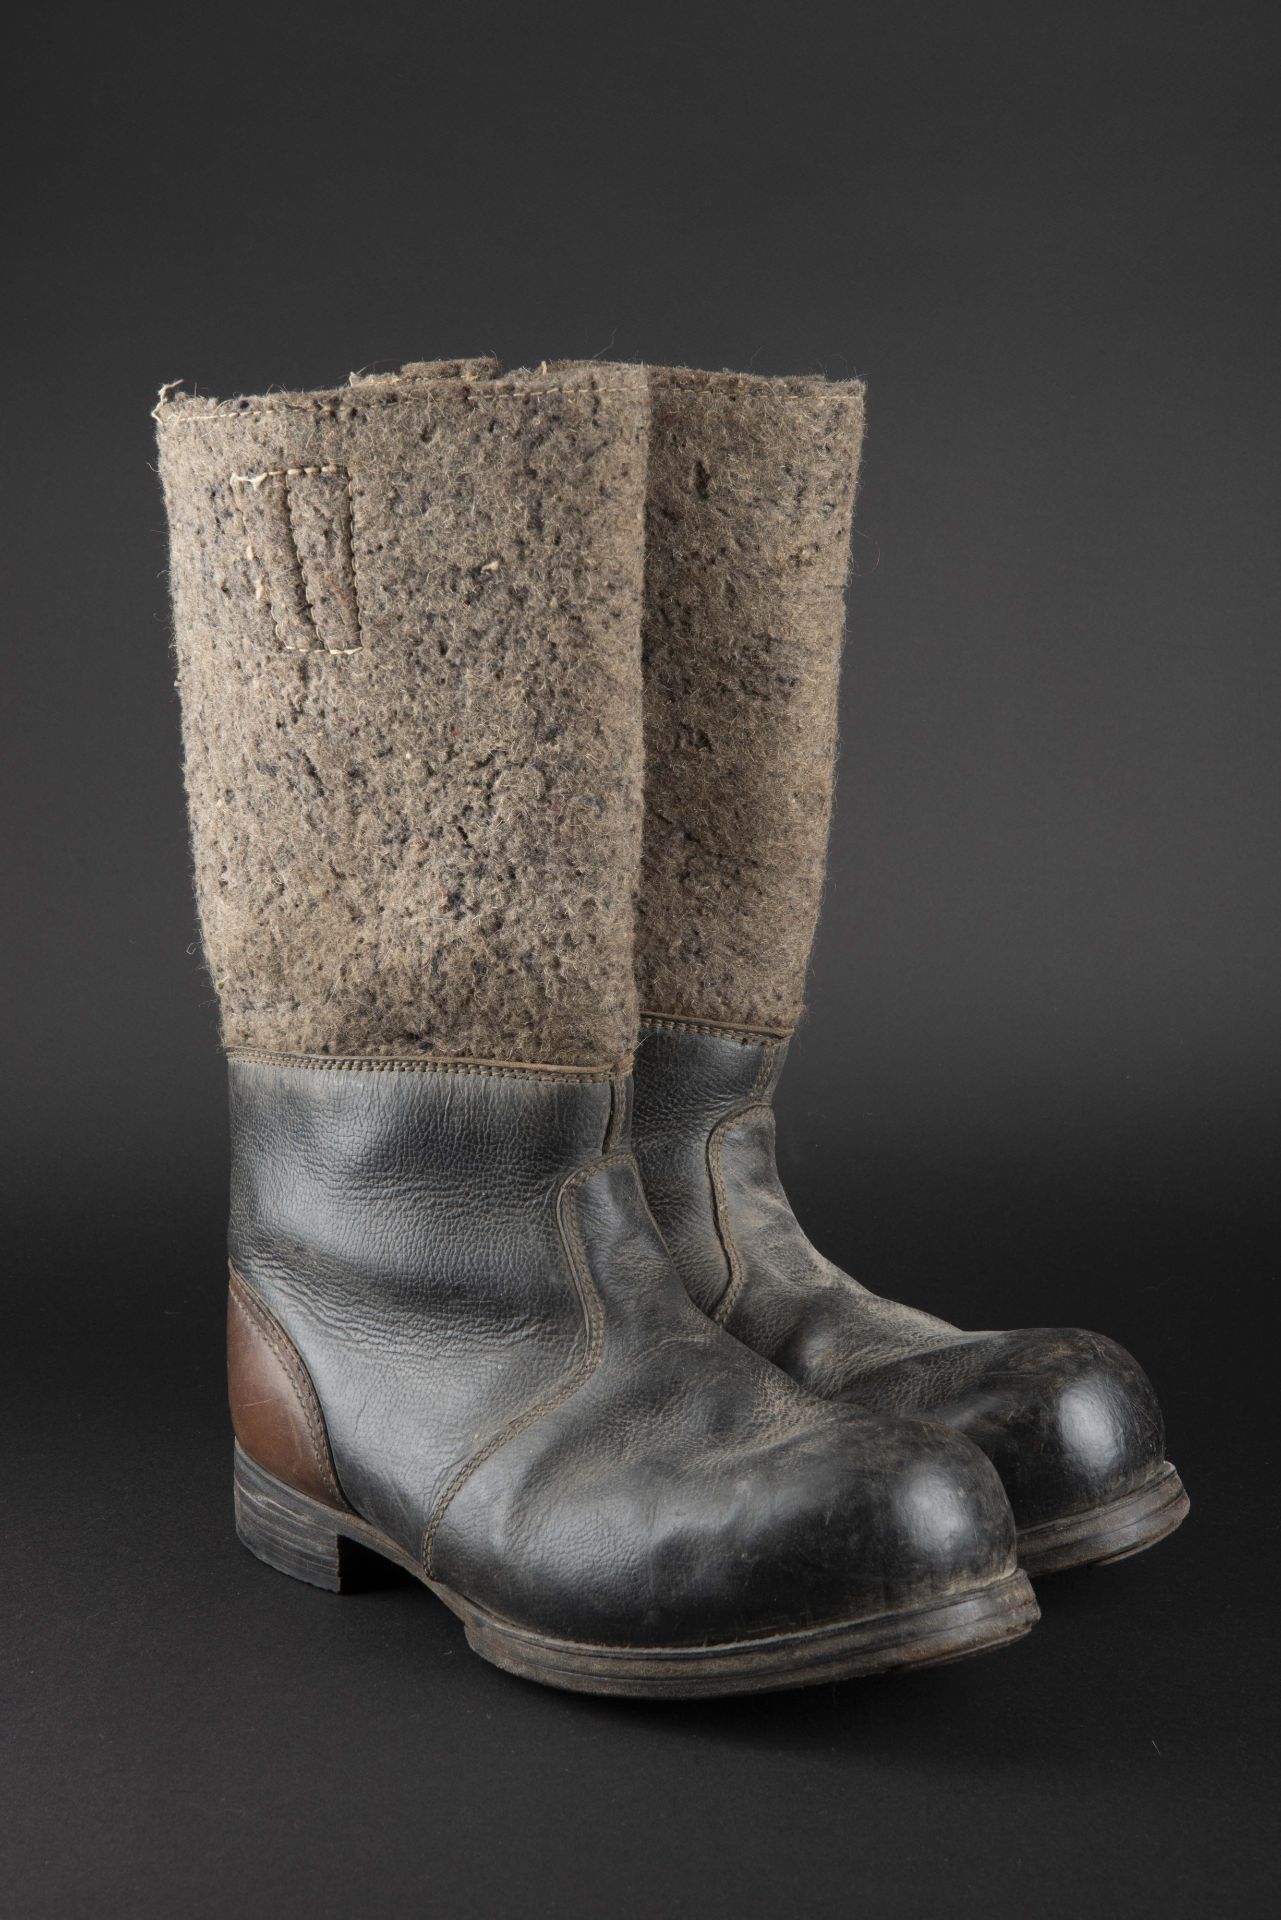 Bottes hivernales. Winter boots.  - Image 2 of 4